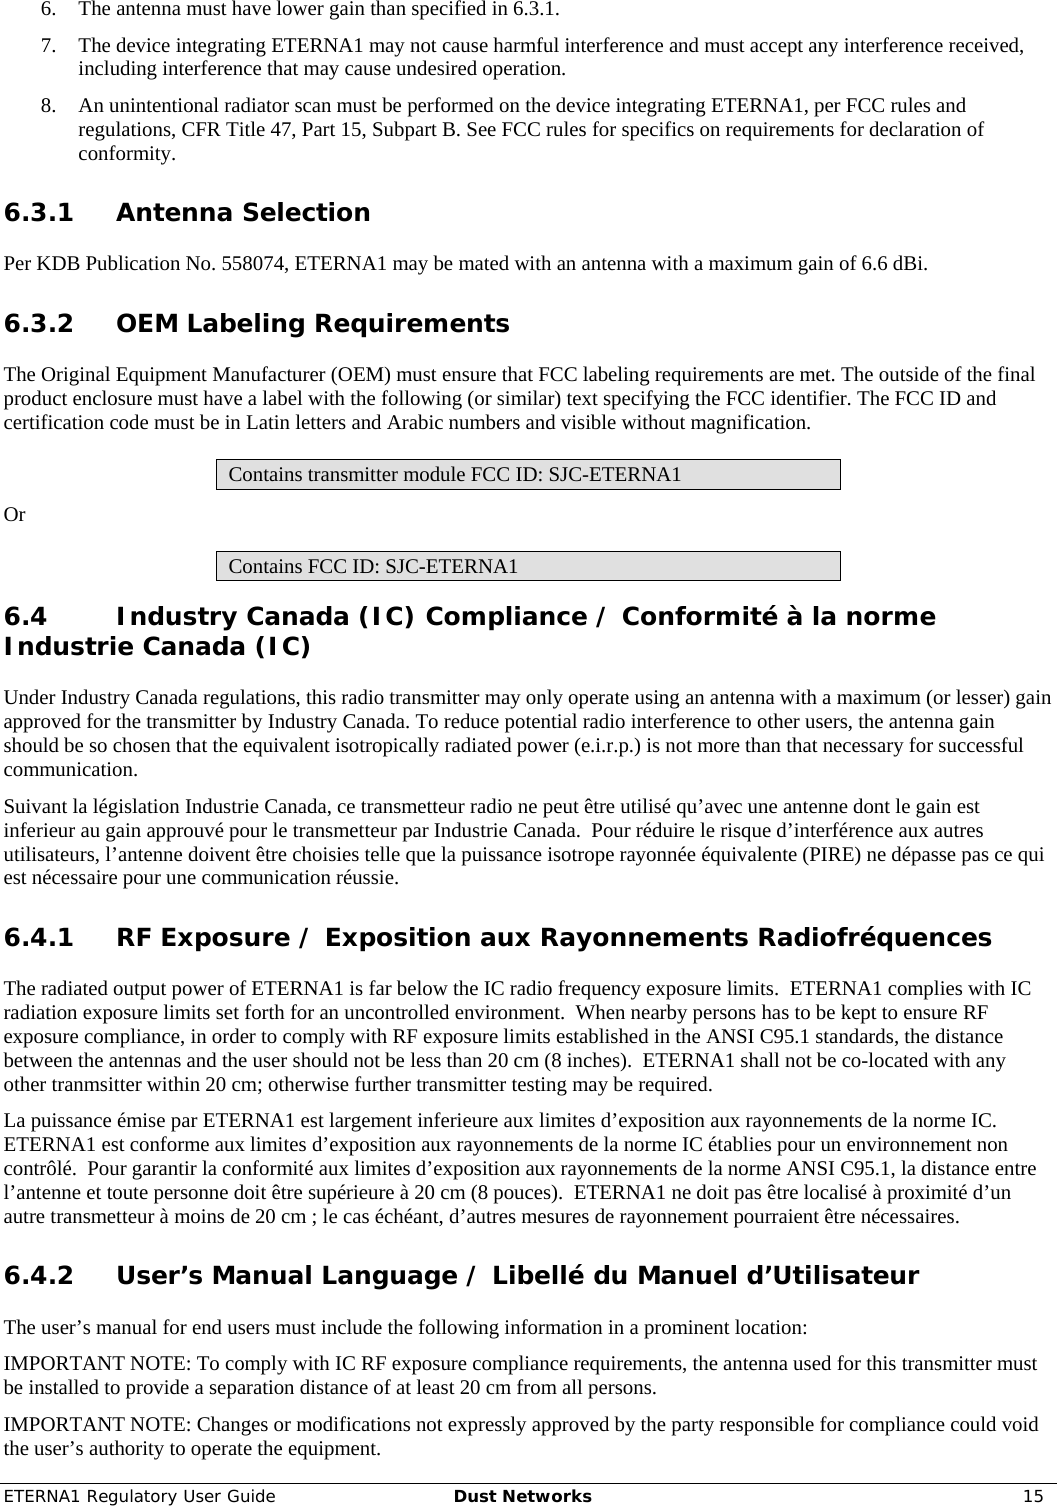 ETERNA1 Regulatory User Guide  Dust Networks  15  6. The antenna must have lower gain than specified in 6.3.1. 7. The device integrating ETERNA1 may not cause harmful interference and must accept any interference received, including interference that may cause undesired operation. 8. An unintentional radiator scan must be performed on the device integrating ETERNA1, per FCC rules and regulations, CFR Title 47, Part 15, Subpart B. See FCC rules for specifics on requirements for declaration of conformity. 6.3.1 Antenna Selection Per KDB Publication No. 558074, ETERNA1 may be mated with an antenna with a maximum gain of 6.6 dBi. 6.3.2 OEM Labeling Requirements The Original Equipment Manufacturer (OEM) must ensure that FCC labeling requirements are met. The outside of the final product enclosure must have a label with the following (or similar) text specifying the FCC identifier. The FCC ID and certification code must be in Latin letters and Arabic numbers and visible without magnification. Contains transmitter module FCC ID: SJC-ETERNA1 Or Contains FCC ID: SJC-ETERNA1 6.4 Industry Canada (IC) Compliance / Conformité à la norme Industrie Canada (IC) Under Industry Canada regulations, this radio transmitter may only operate using an antenna with a maximum (or lesser) gain approved for the transmitter by Industry Canada. To reduce potential radio interference to other users, the antenna gain should be so chosen that the equivalent isotropically radiated power (e.i.r.p.) is not more than that necessary for successful communication.   Suivant la législation Industrie Canada, ce transmetteur radio ne peut être utilisé qu’avec une antenne dont le gain est inferieur au gain approuvé pour le transmetteur par Industrie Canada.  Pour réduire le risque d’interférence aux autres utilisateurs, l’antenne doivent être choisies telle que la puissance isotrope rayonnée équivalente (PIRE) ne dépasse pas ce qui est nécessaire pour une communication réussie. 6.4.1 RF Exposure / Exposition aux Rayonnements Radiofréquences The radiated output power of ETERNA1 is far below the IC radio frequency exposure limits.  ETERNA1 complies with IC radiation exposure limits set forth for an uncontrolled environment.  When nearby persons has to be kept to ensure RF exposure compliance, in order to comply with RF exposure limits established in the ANSI C95.1 standards, the distance between the antennas and the user should not be less than 20 cm (8 inches).  ETERNA1 shall not be co-located with any other tranmsitter within 20 cm; otherwise further transmitter testing may be required. La puissance émise par ETERNA1 est largement inferieure aux limites d’exposition aux rayonnements de la norme IC. ETERNA1 est conforme aux limites d’exposition aux rayonnements de la norme IC établies pour un environnement non contrôlé.  Pour garantir la conformité aux limites d’exposition aux rayonnements de la norme ANSI C95.1, la distance entre l’antenne et toute personne doit être supérieure à 20 cm (8 pouces).  ETERNA1 ne doit pas être localisé à proximité d’un autre transmetteur à moins de 20 cm ; le cas échéant, d’autres mesures de rayonnement pourraient être nécessaires. 6.4.2 User’s Manual Language / Libellé du Manuel d’Utilisateur The user’s manual for end users must include the following information in a prominent location: IMPORTANT NOTE: To comply with IC RF exposure compliance requirements, the antenna used for this transmitter must be installed to provide a separation distance of at least 20 cm from all persons. IMPORTANT NOTE: Changes or modifications not expressly approved by the party responsible for compliance could void the user’s authority to operate the equipment. 